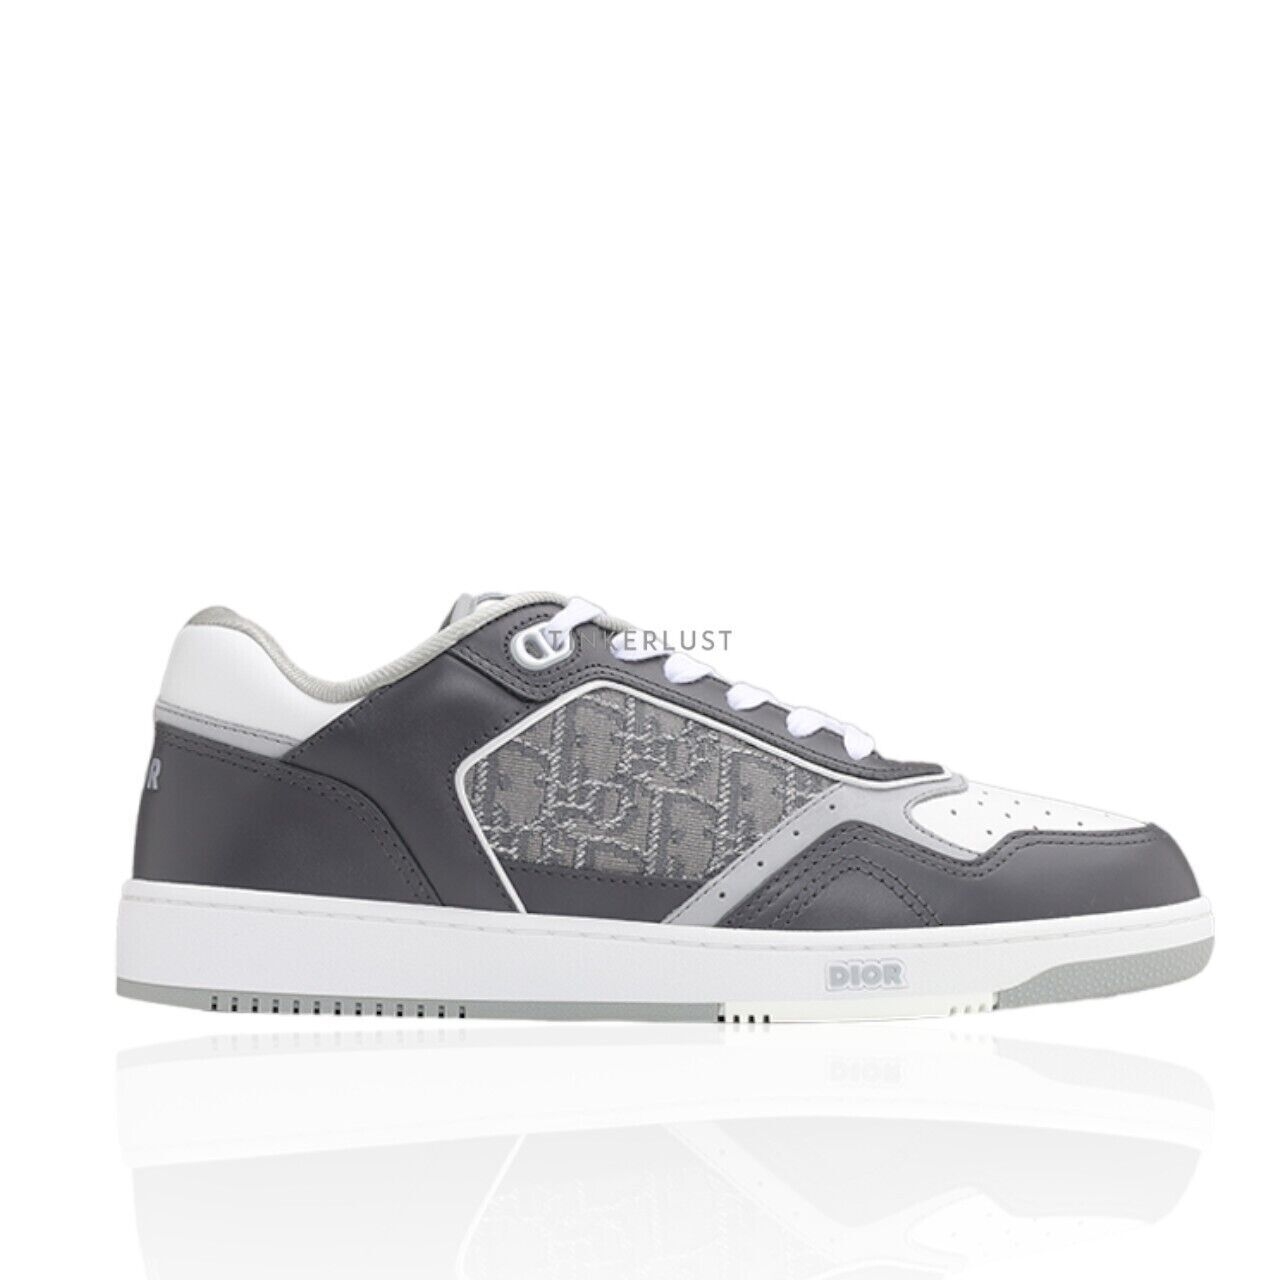 Christian Dior B27 Oblique in Anthracite Gray/White Smooth Calfskin Low Top Sneakers